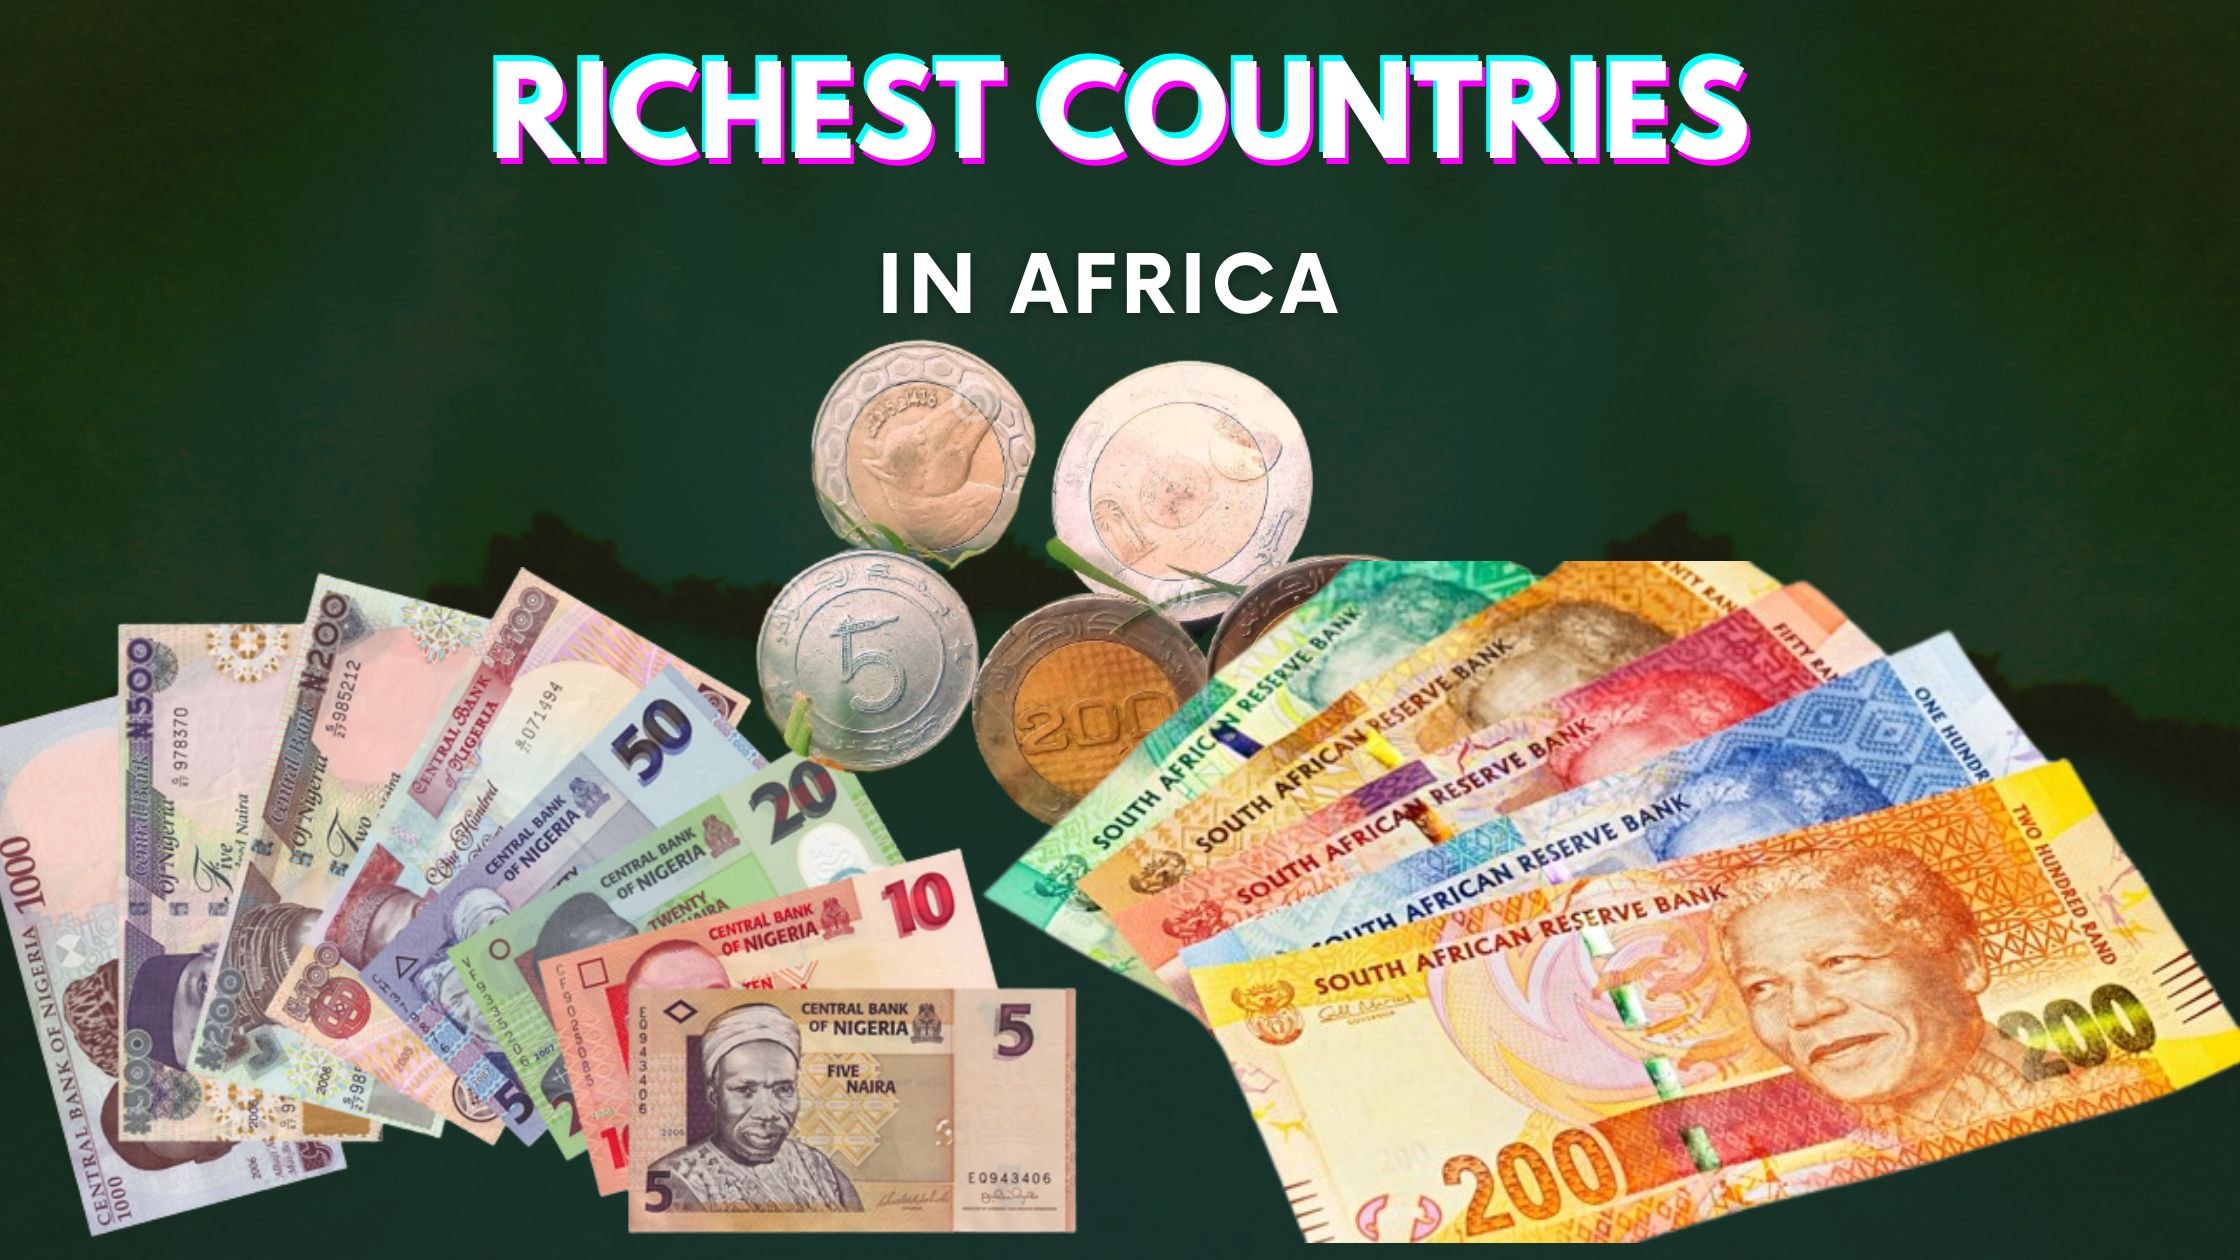 Top 10 Richest Countries In Africa (2022)